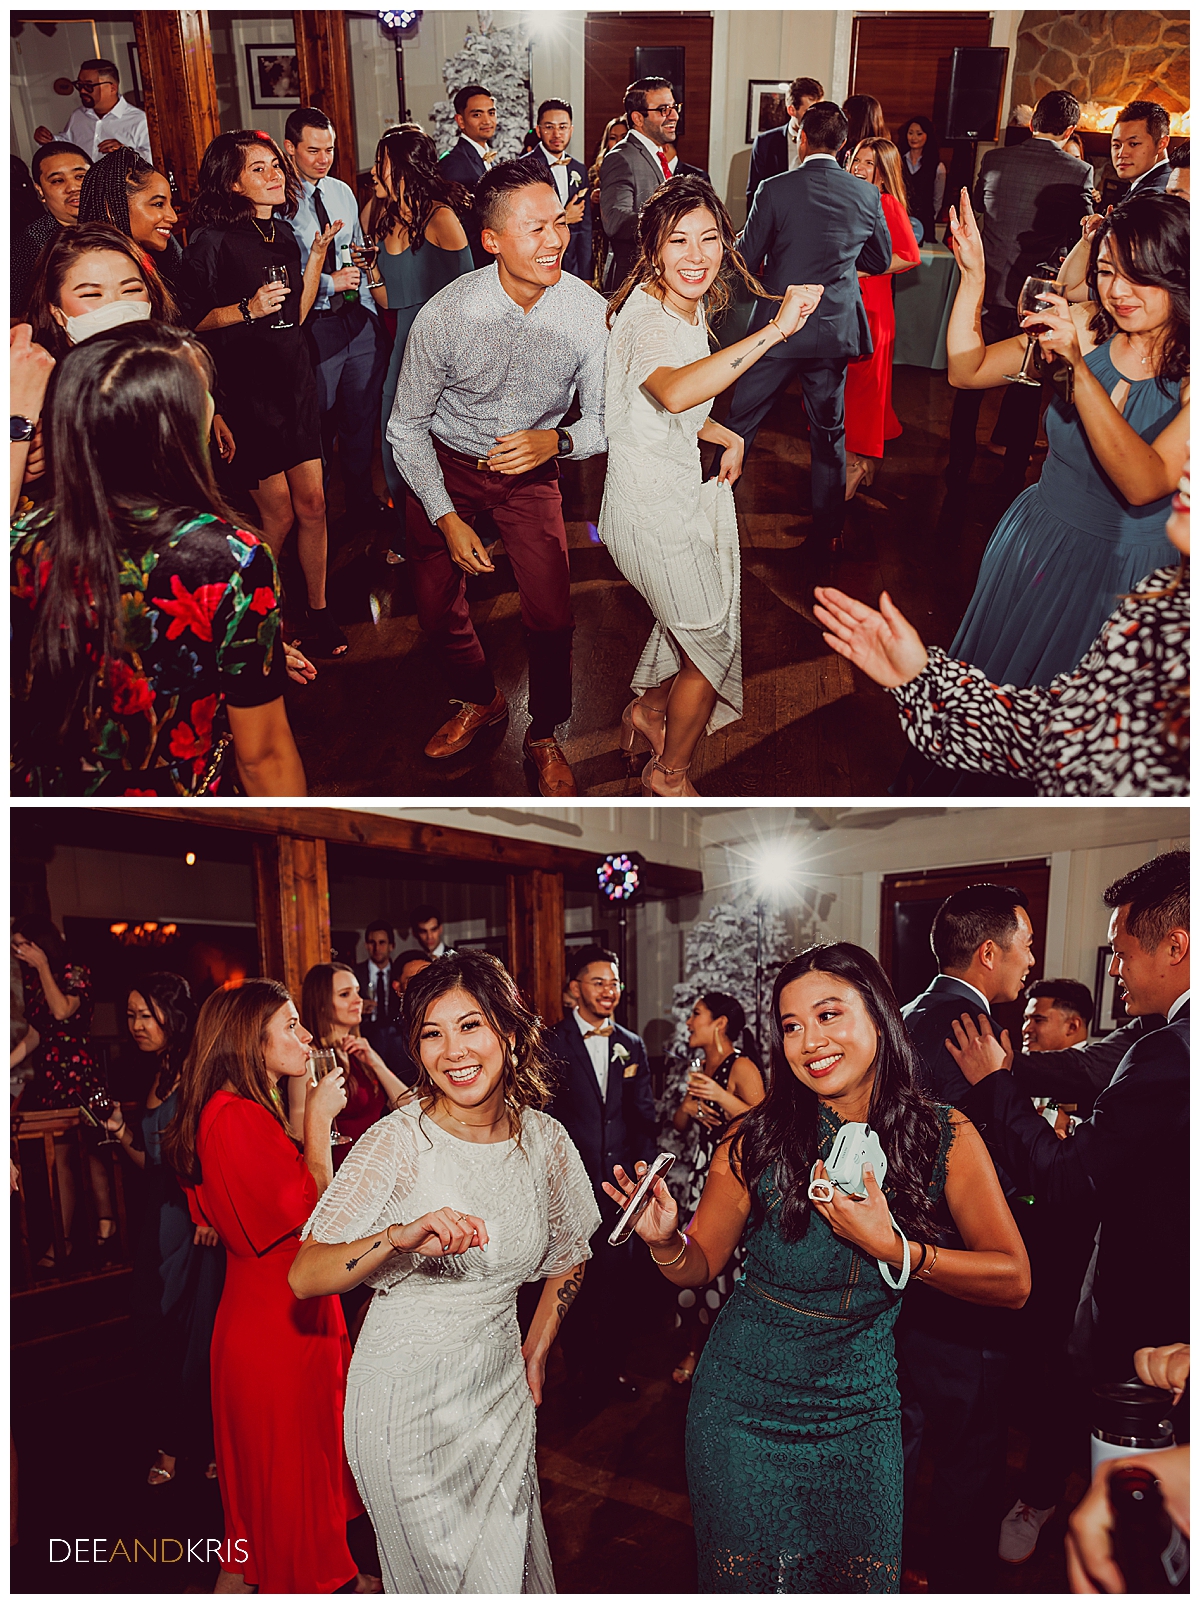 Two images of bride dancing with guests.